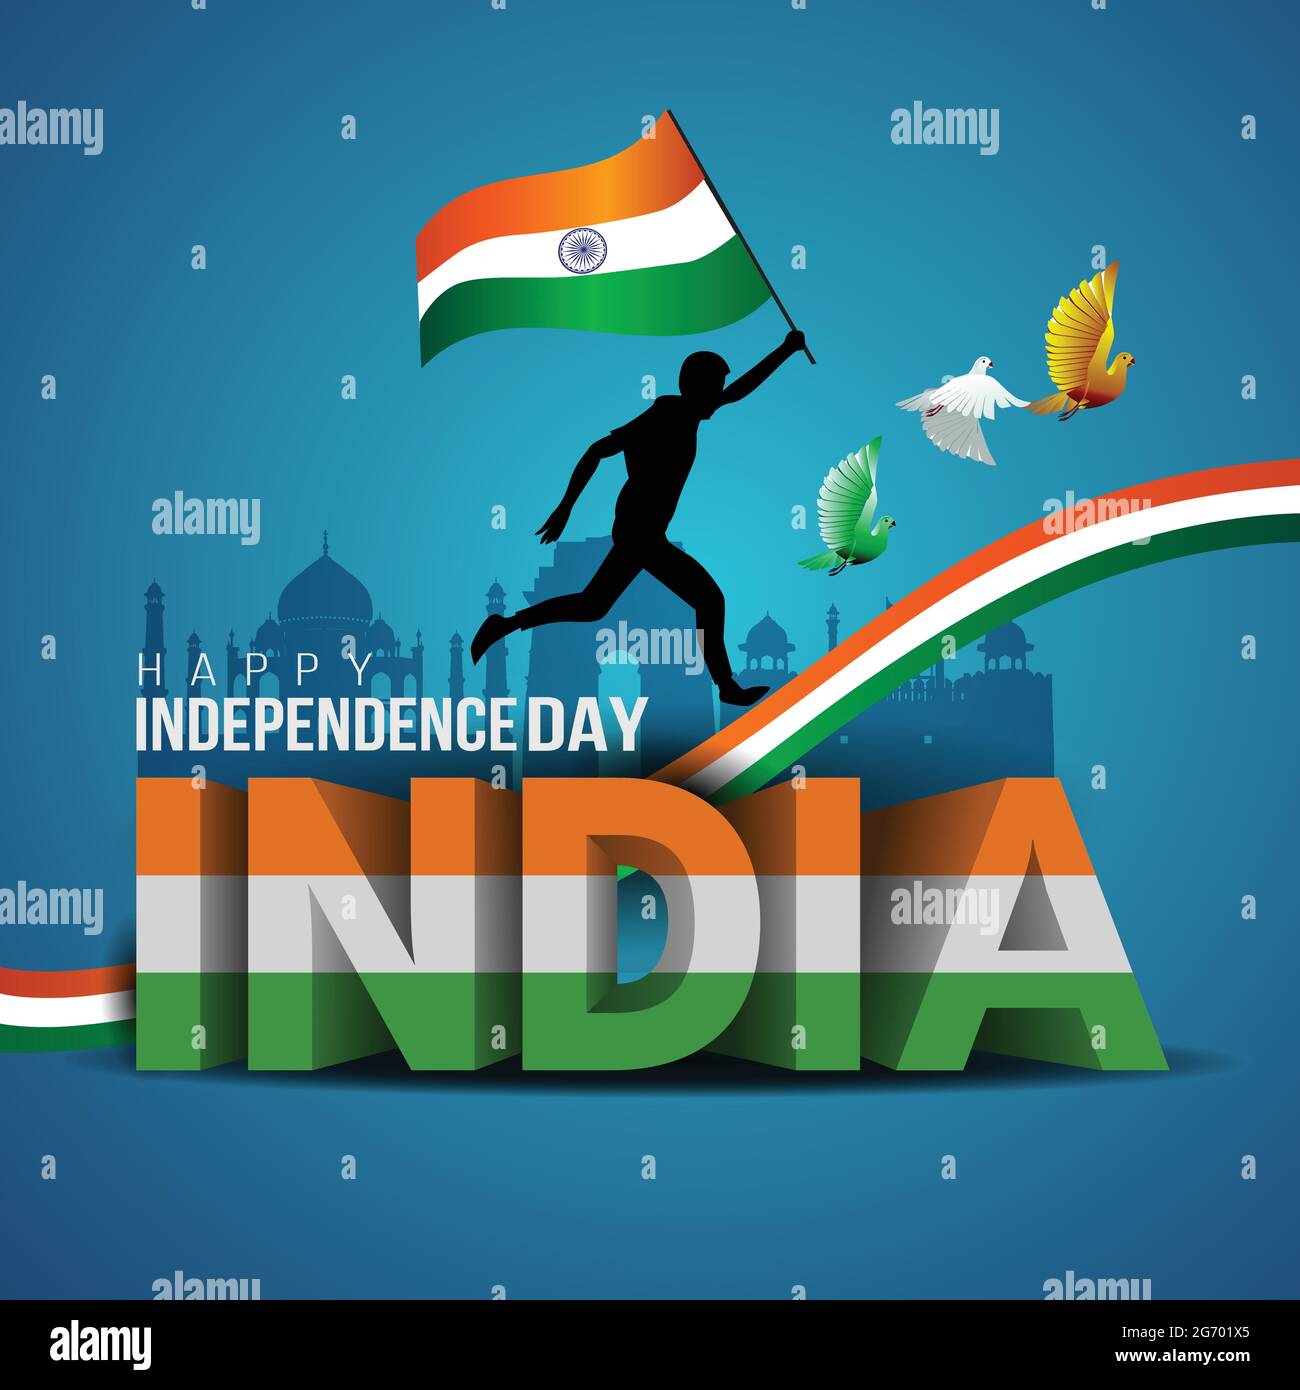 happy independence day india. vector illustration of Indian flag ...